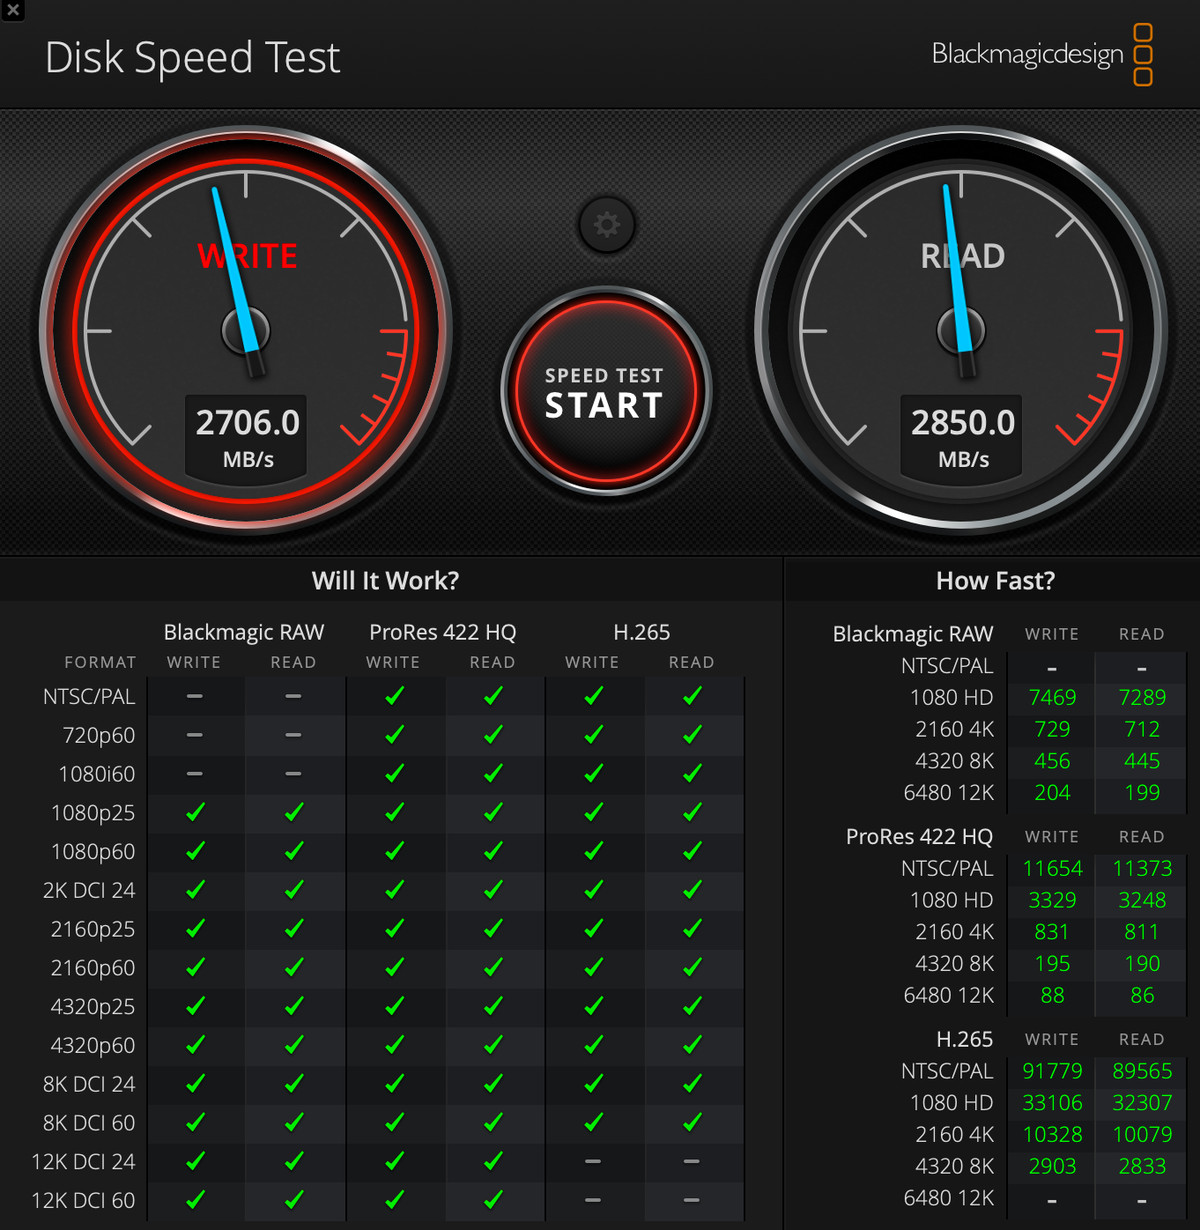 A screenshot of Blackmagic Disk Speed Test indicating scores of 2706 for Write and 2850 for Read.